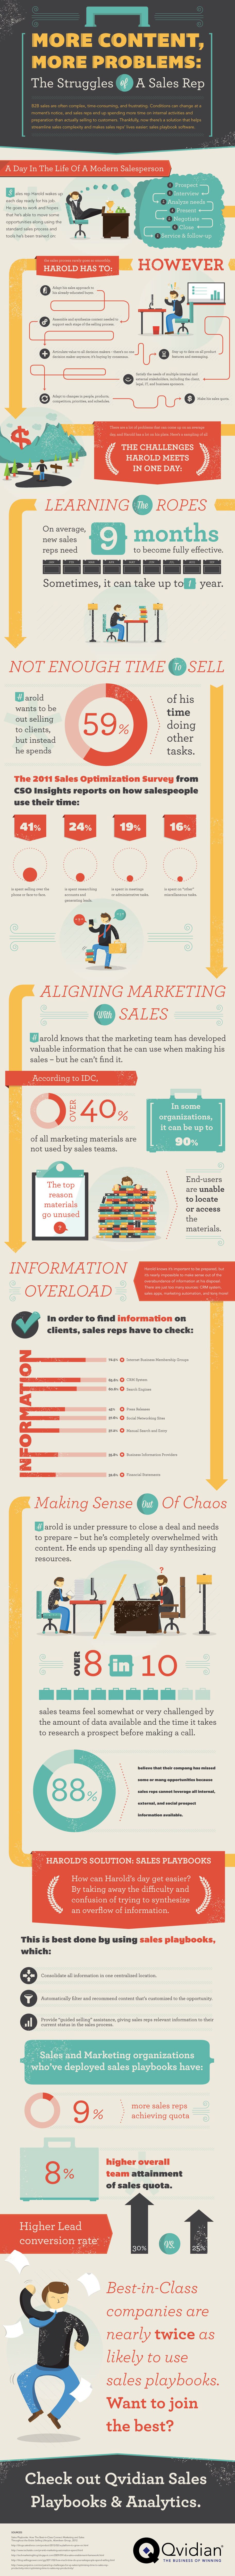 Qvidian-Sales-Playbooks-Infographic